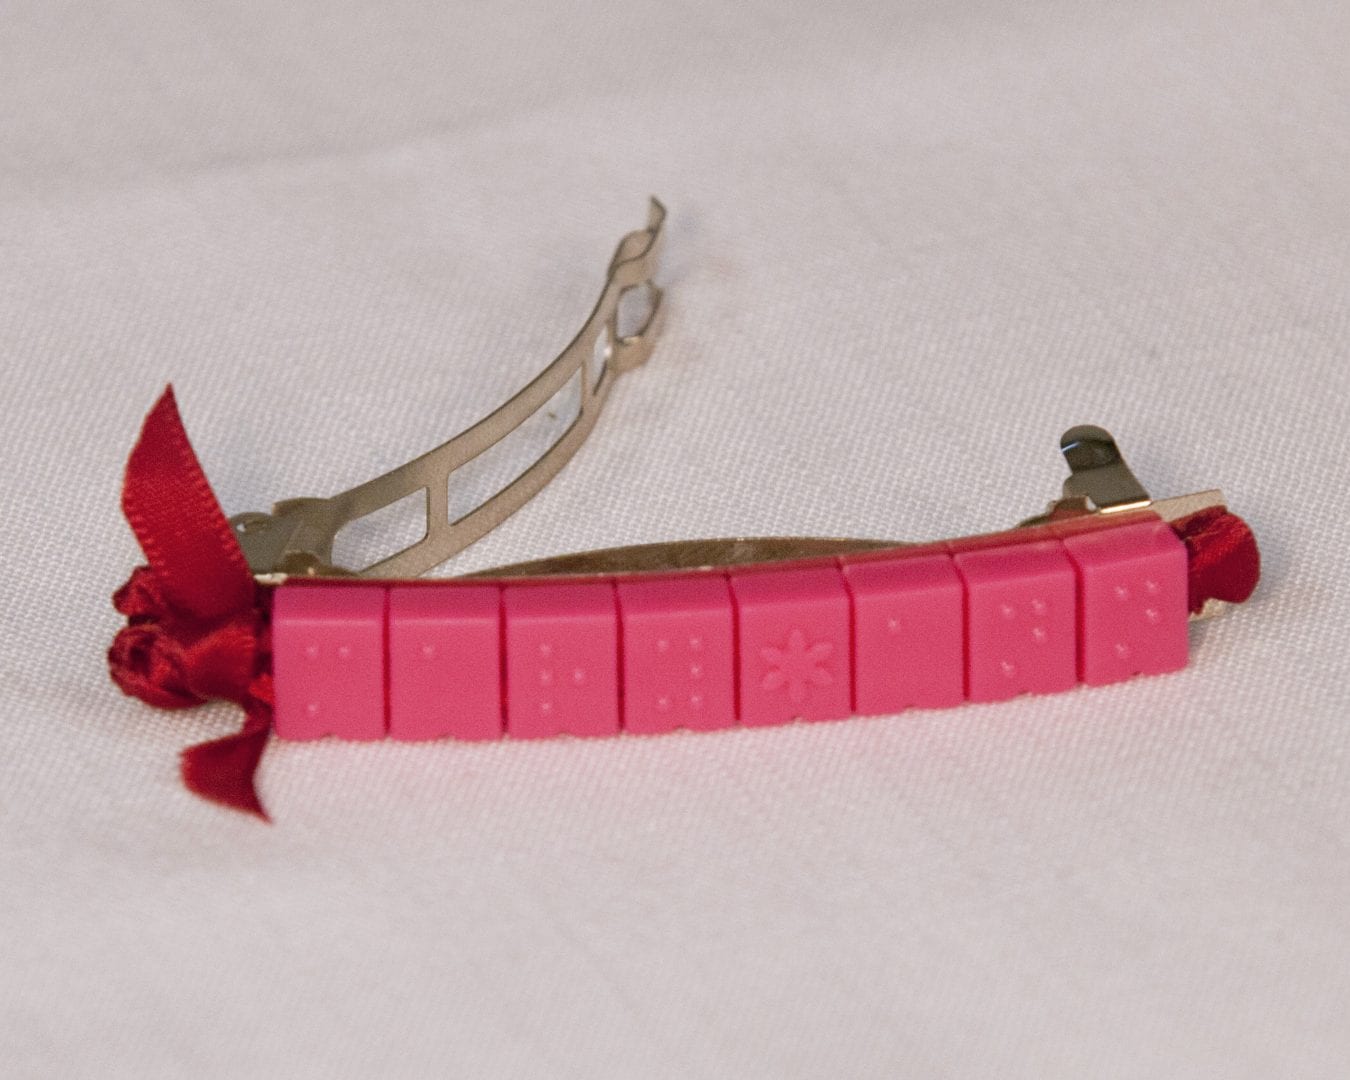 a french style barrette with pink beads as decoration sitting on a table top